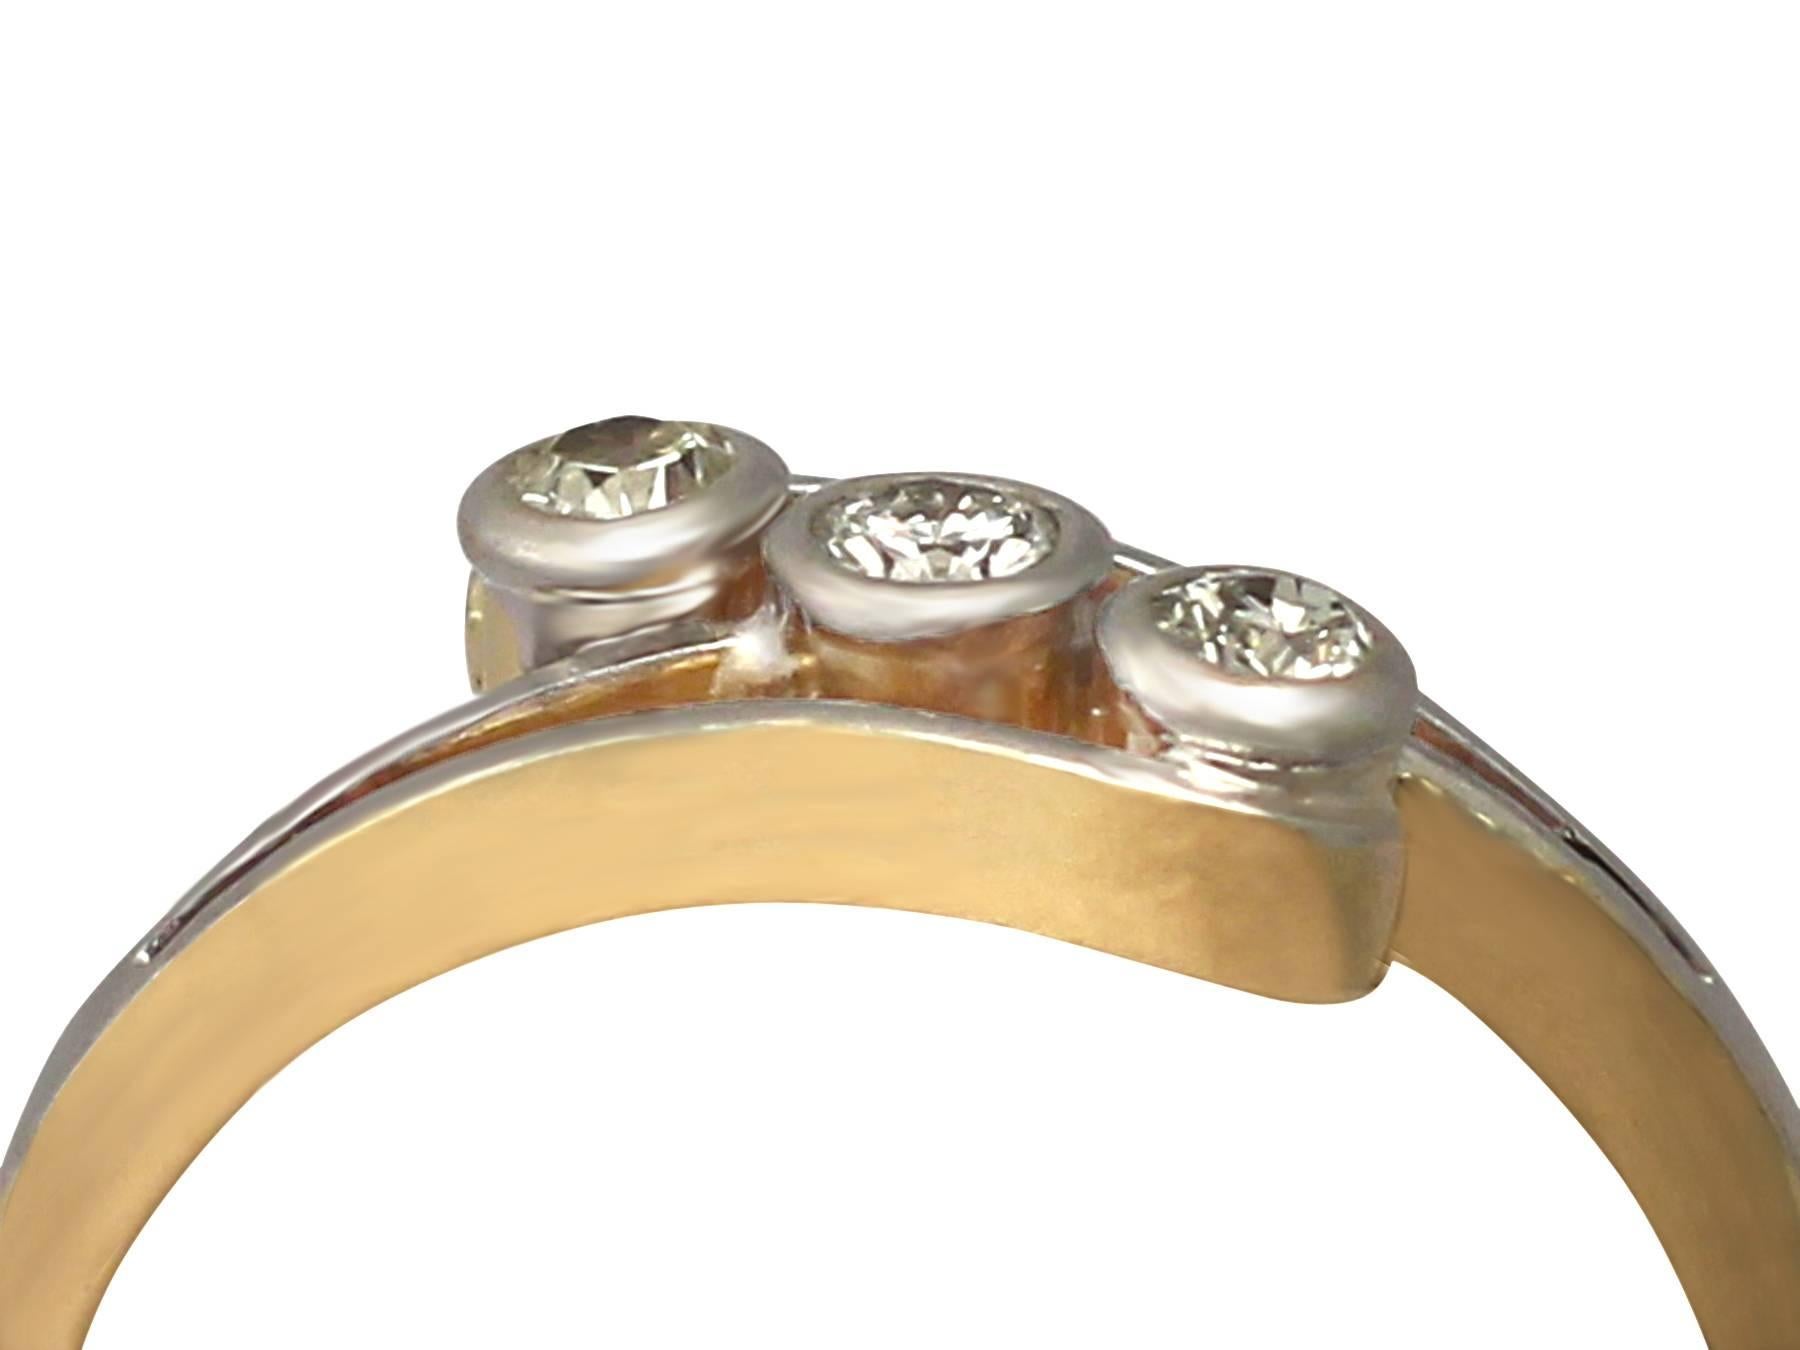 A fine vintage 0.18ct diamond and 18 karat yellow gold, platinum set trilogy twist / dress ring; part of our diverse vintage jewelry and estate jewelry collections

This fine diamond twist trilogy ring has been crafted in 18k yellow gold with a